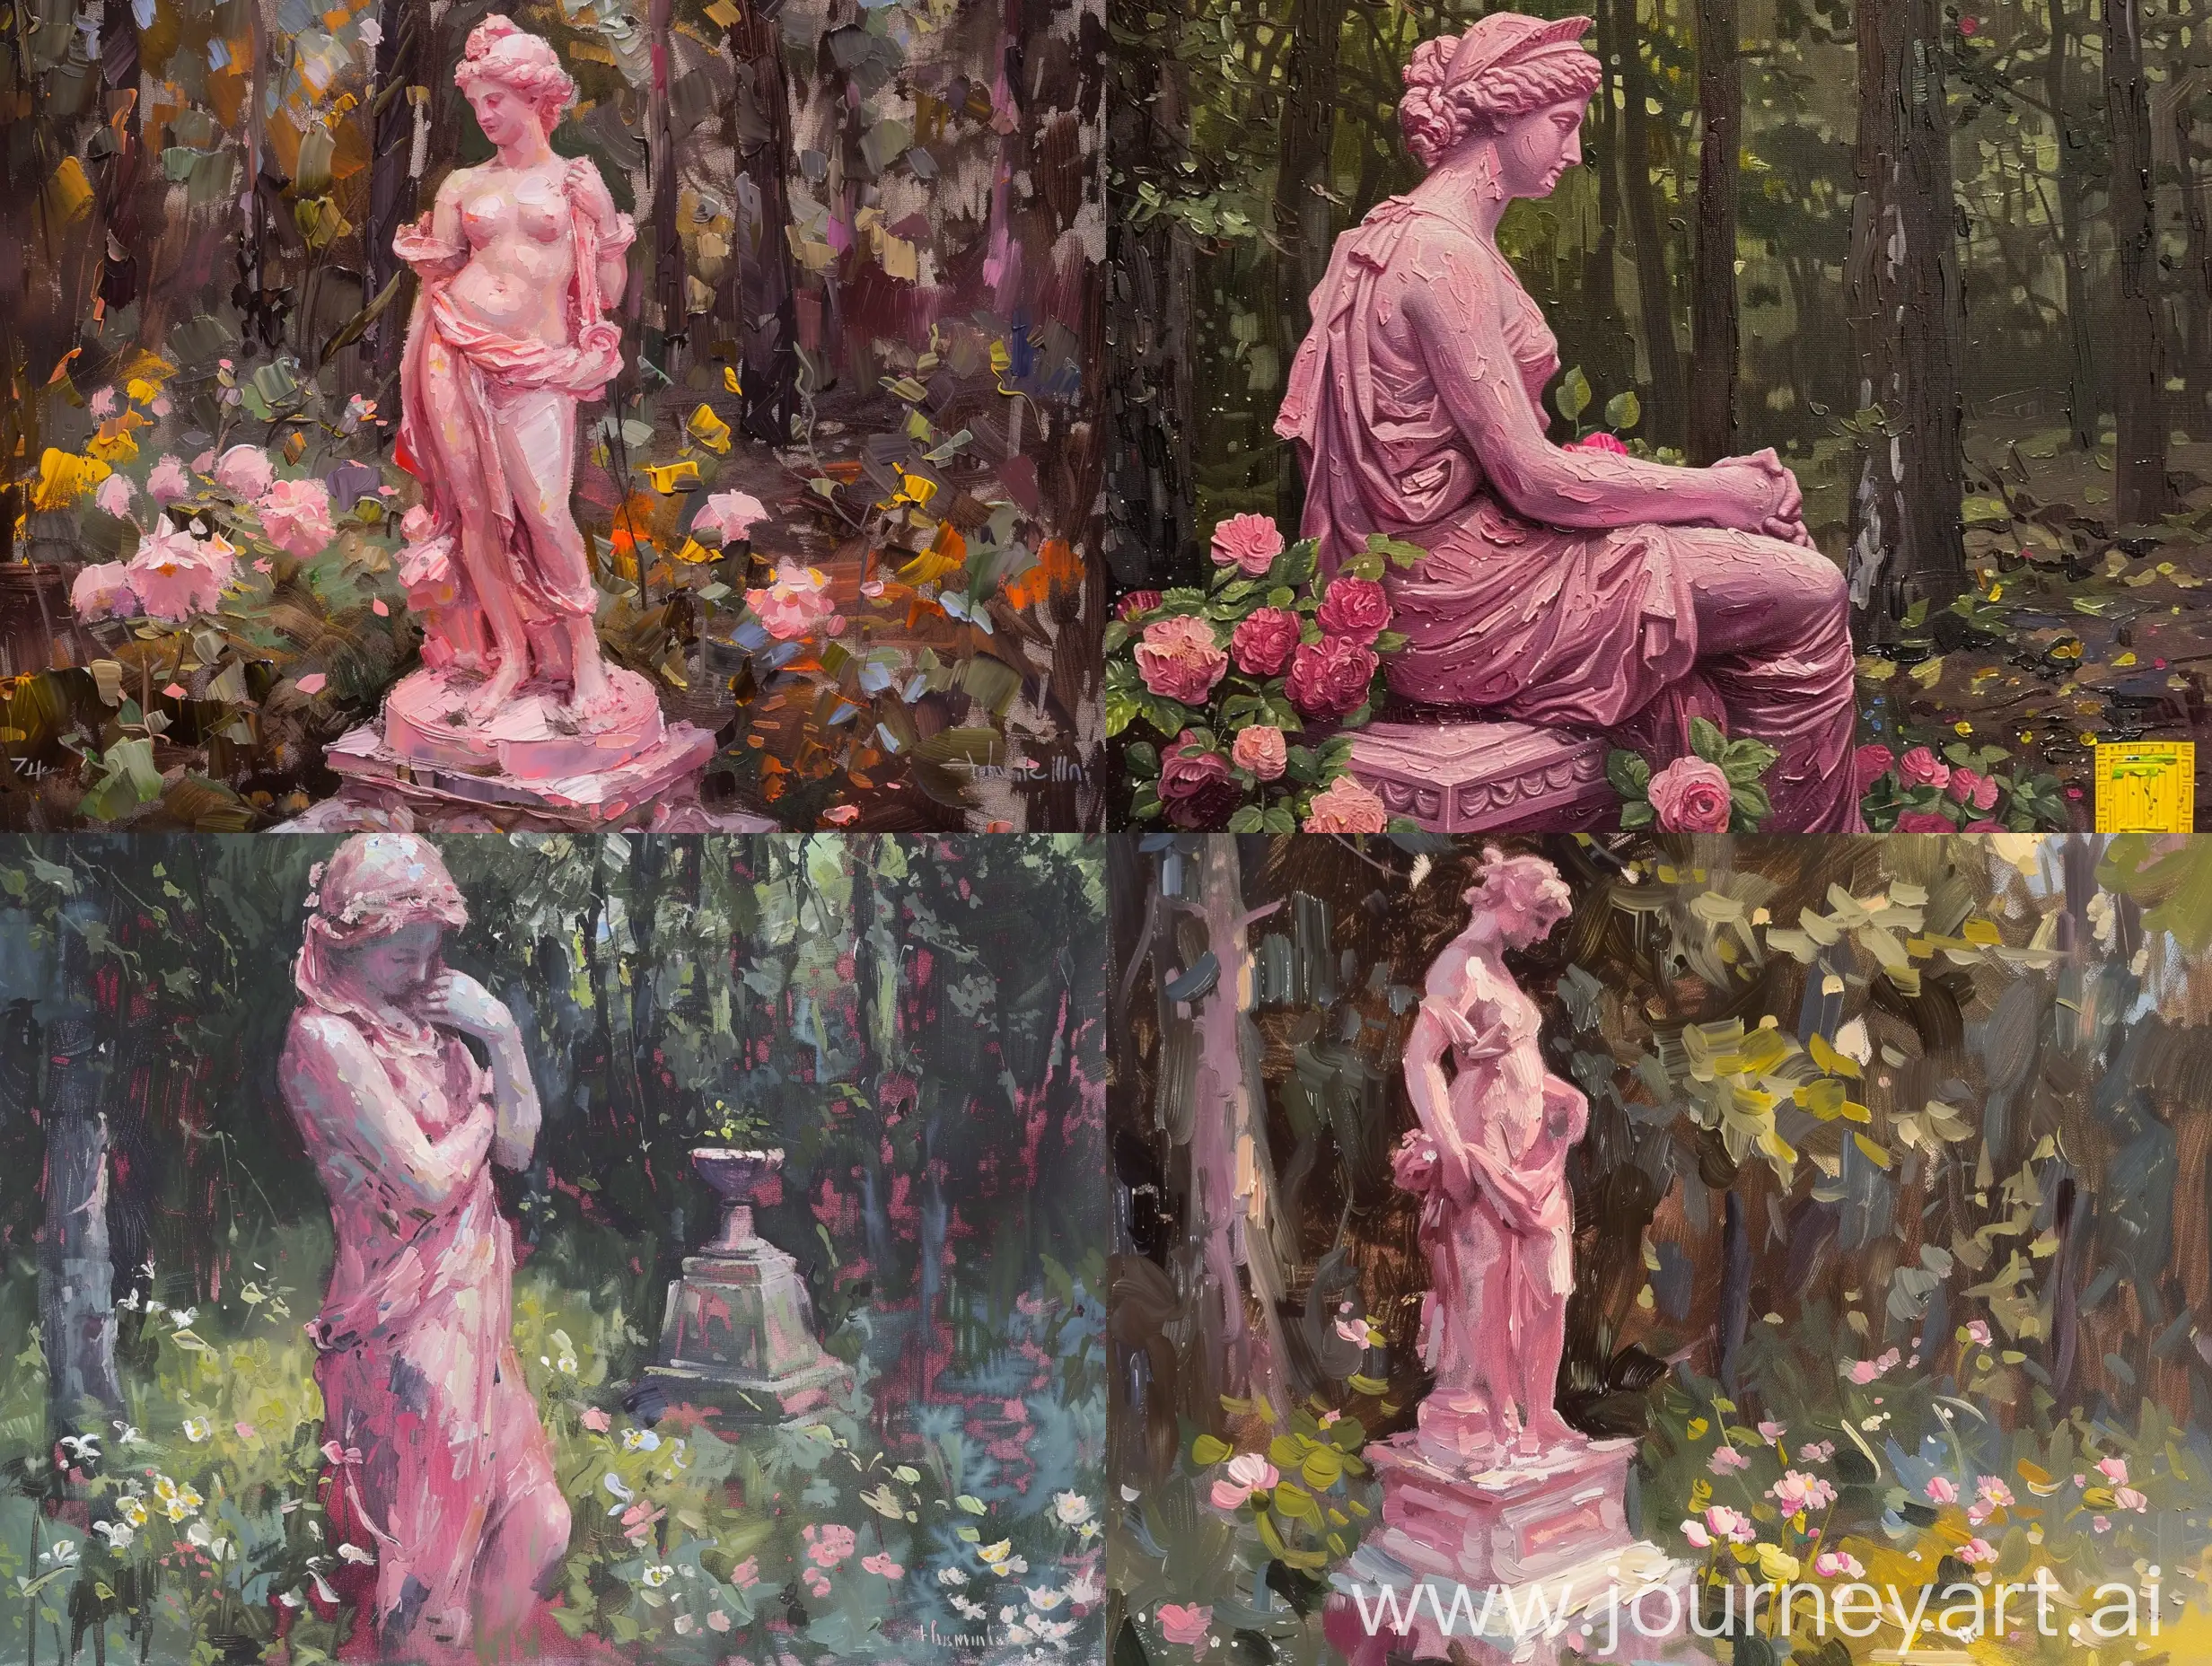 pink Themis statue in the woods, flowers, oil painting, tenderness, inspiration